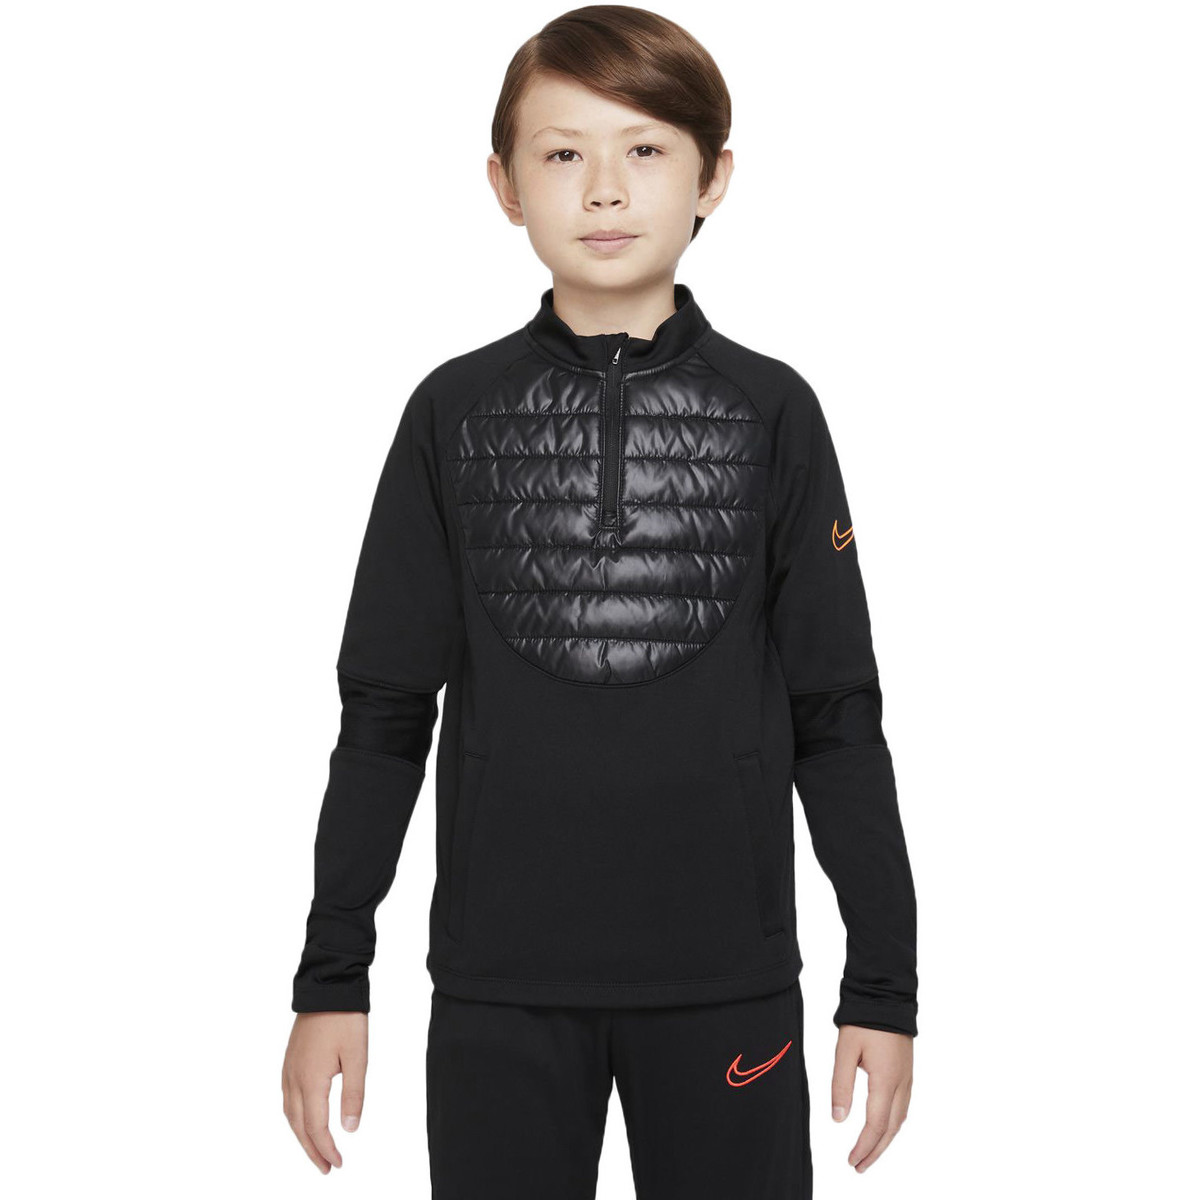 Nike Noir Training Top Therma-fit Academy Winter Warrio